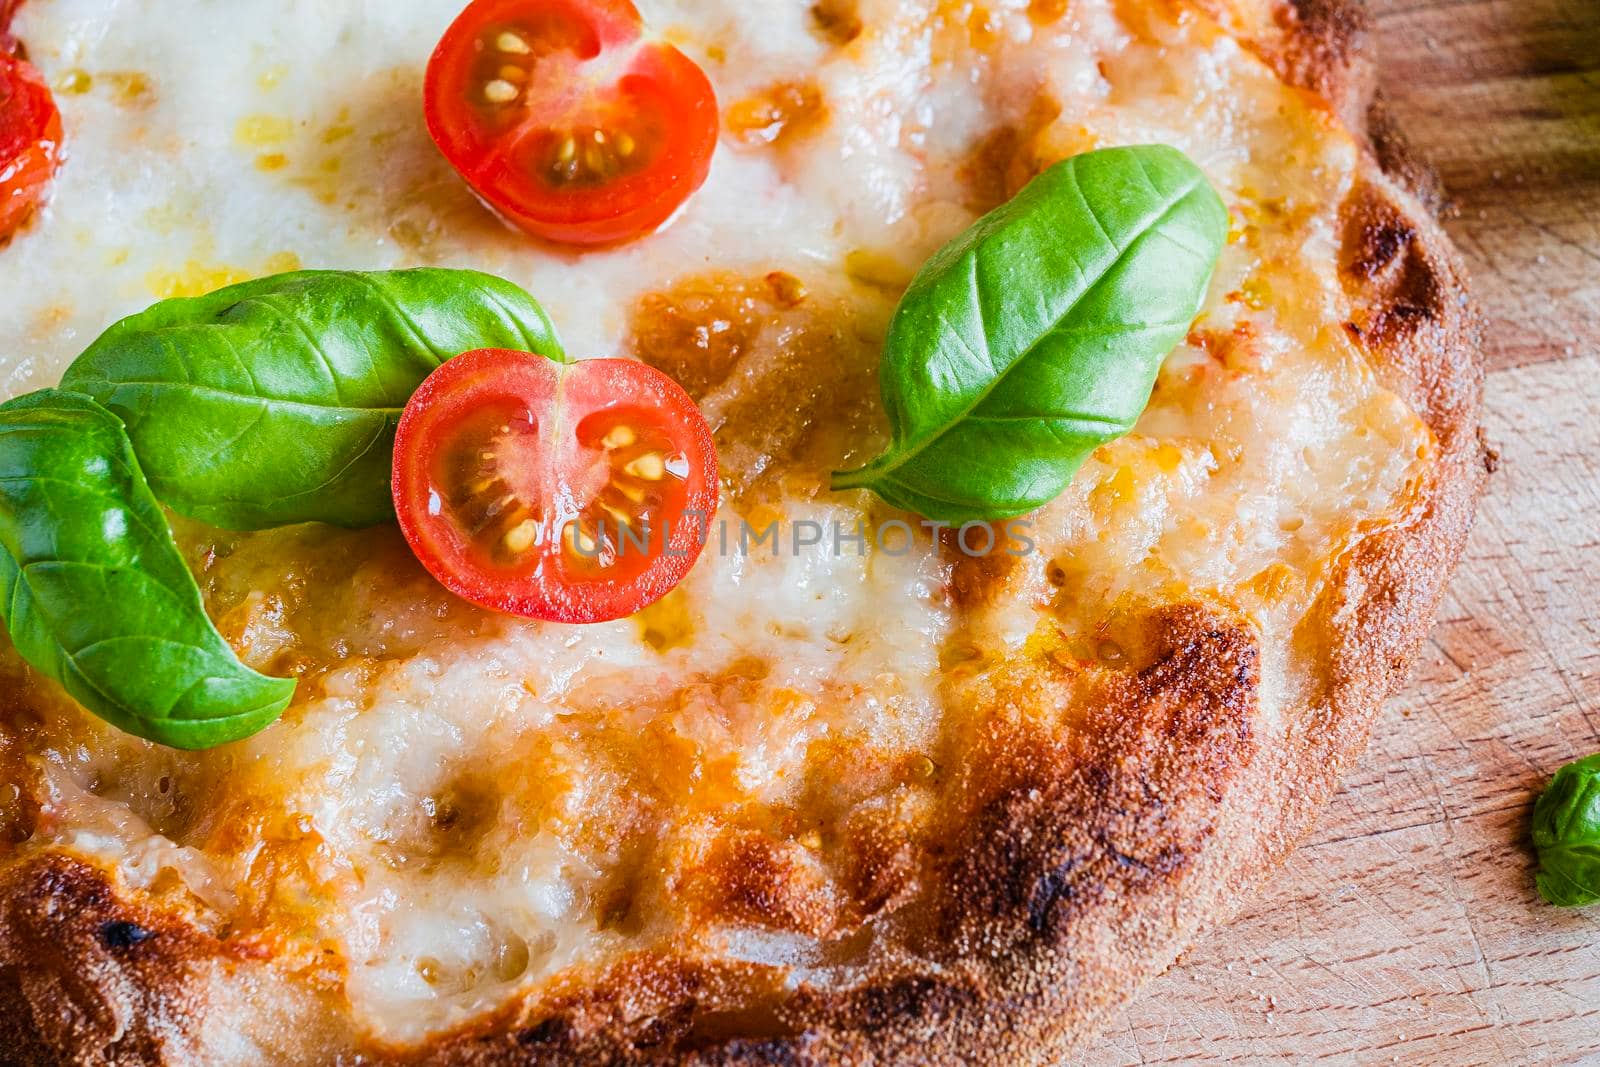 vegetarian pizza with addition of cheese, fresh tomatoes, basil on a wooden rustic table.